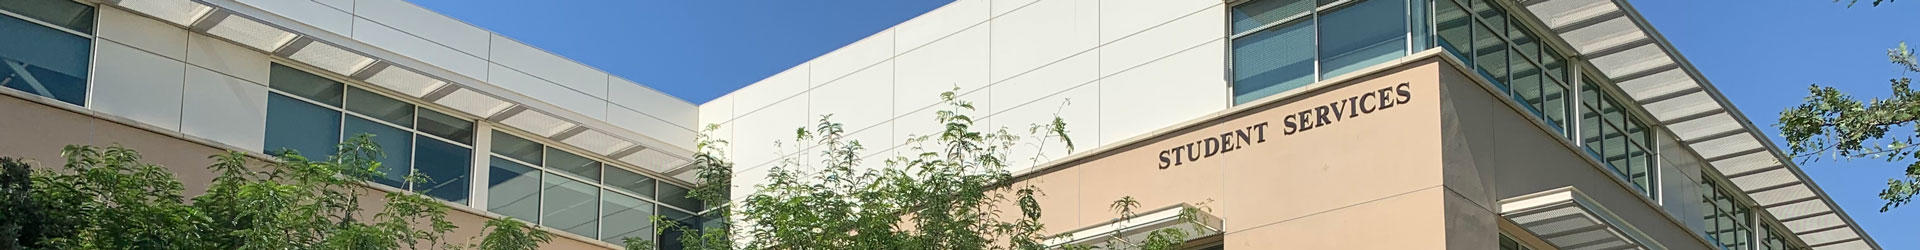 Exterior of the Student Services Building on the UCR campus